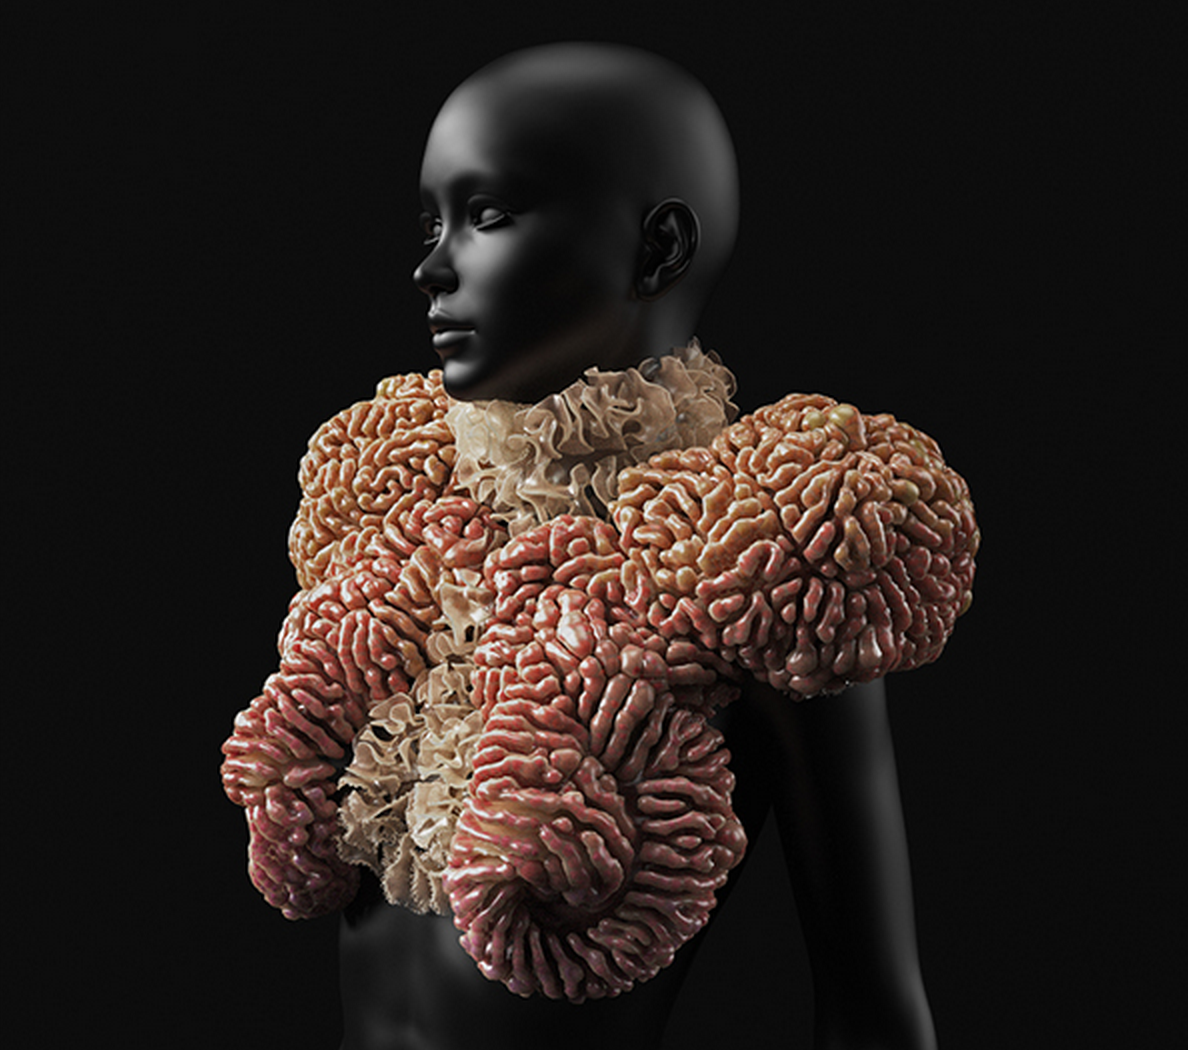 Freaky Organic Apparel “Grown” and 3D Printed